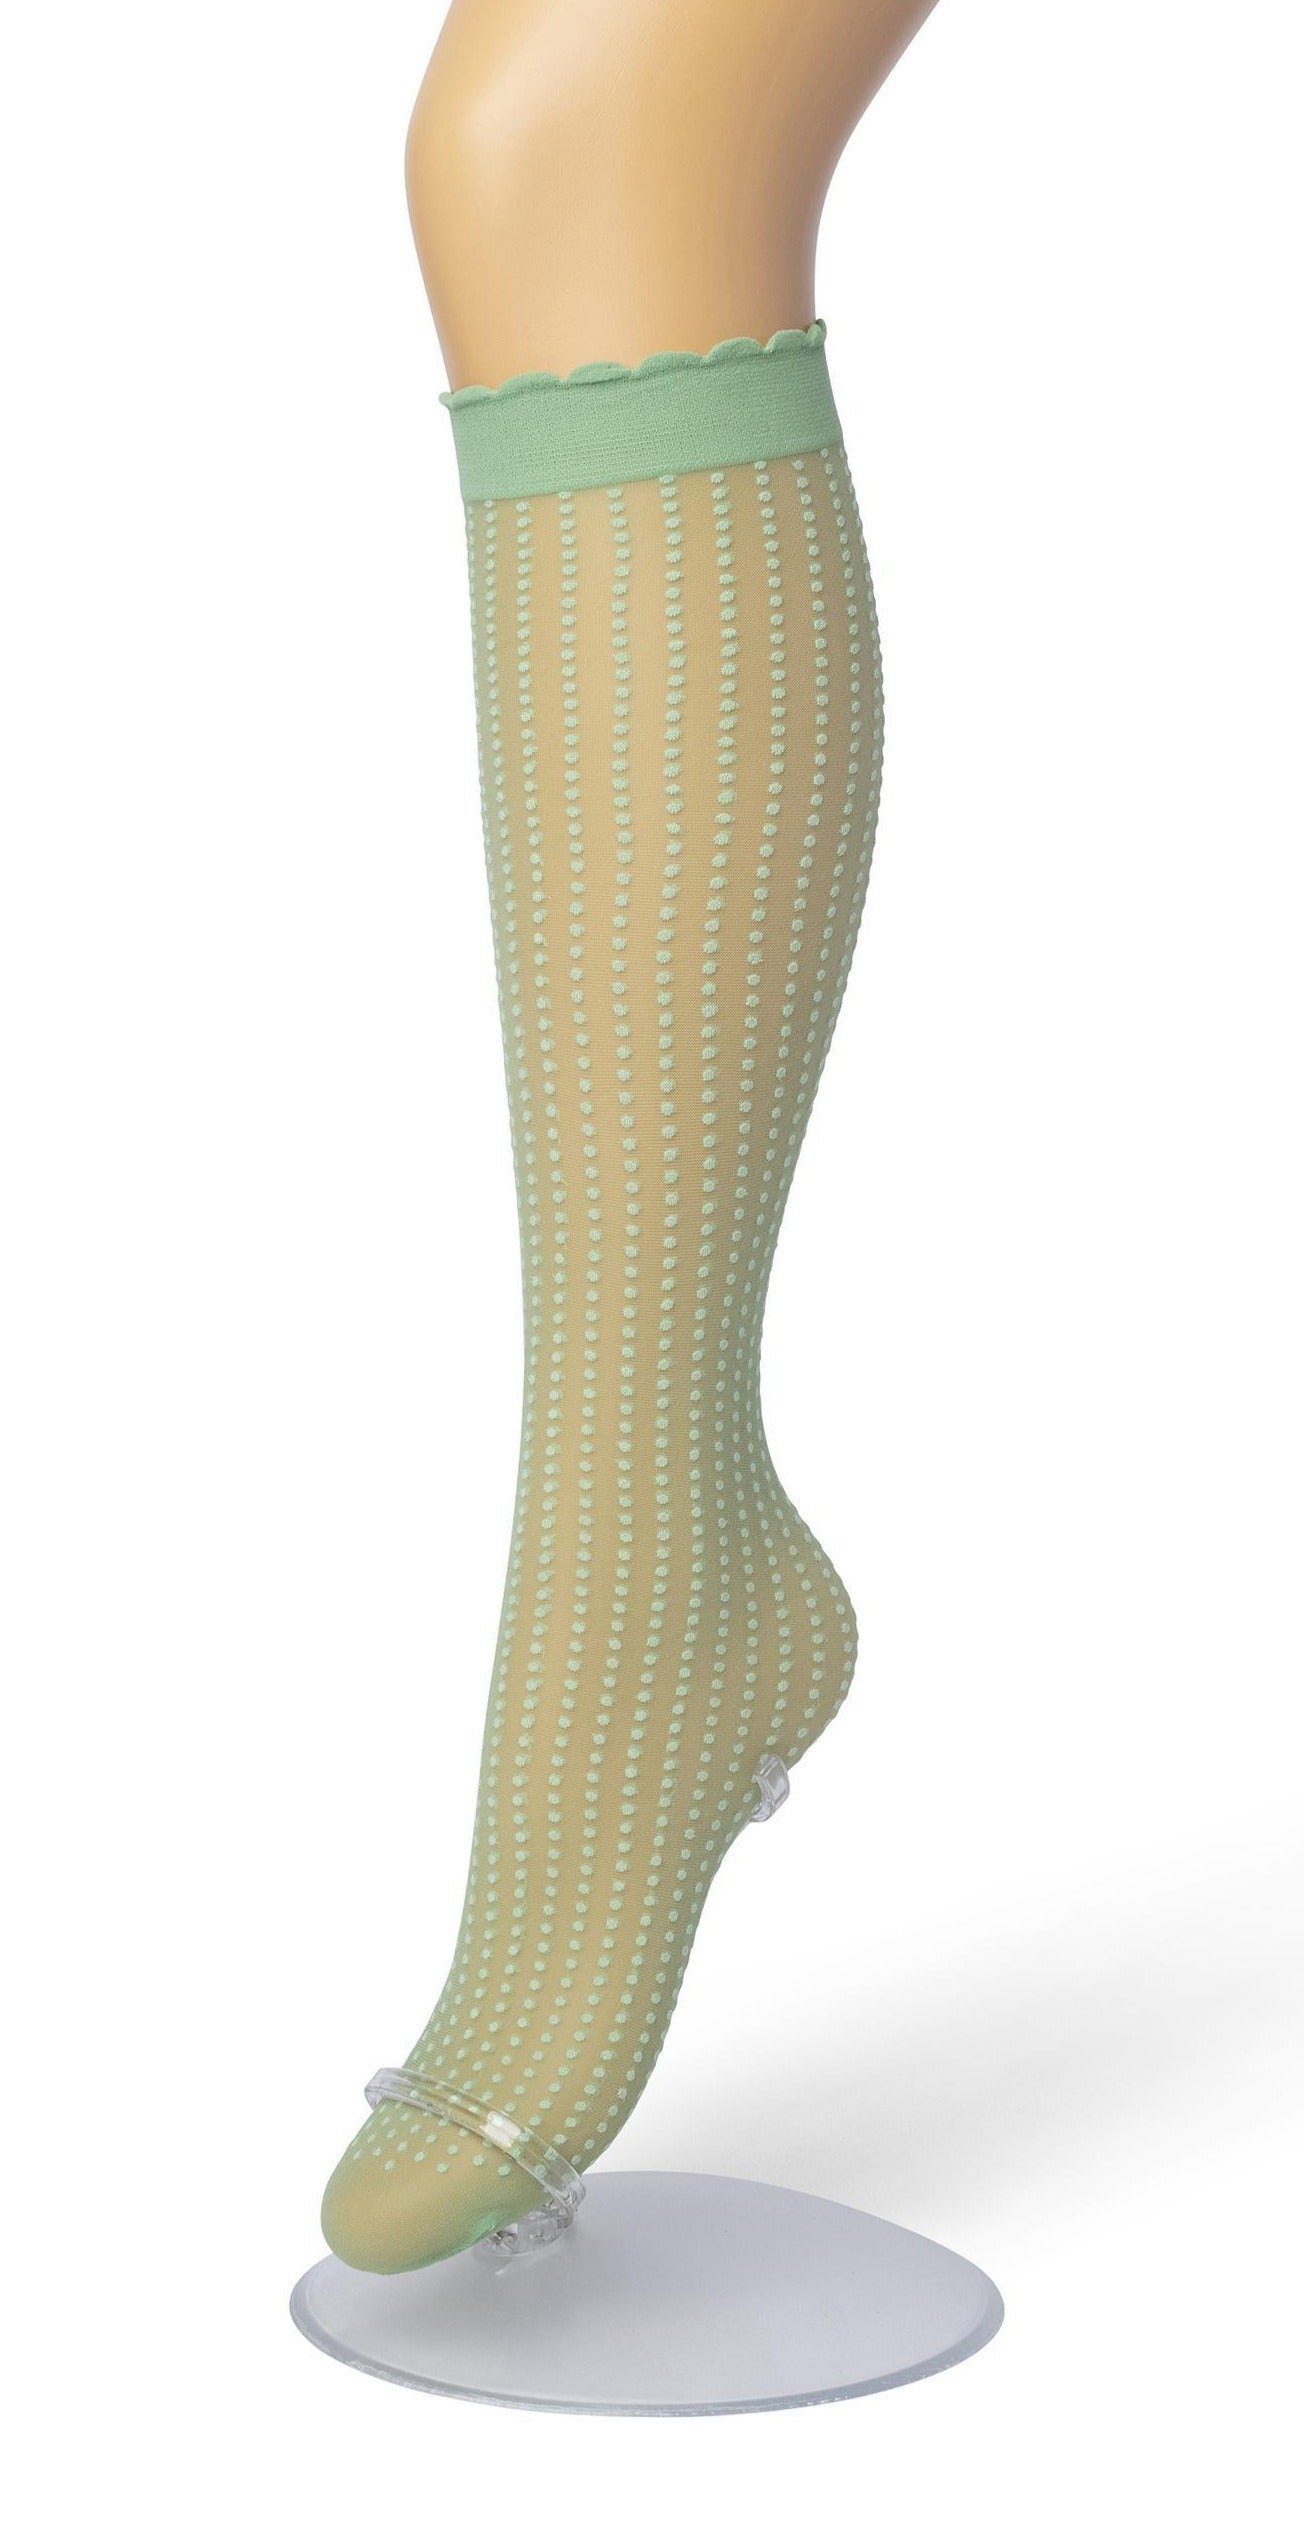 Bonnie Doon Batik Dots - Pale sage green sheer fashion knee-high socks with a dotted vertical stripe pattern, deep comfort cuff with scalloped edge.